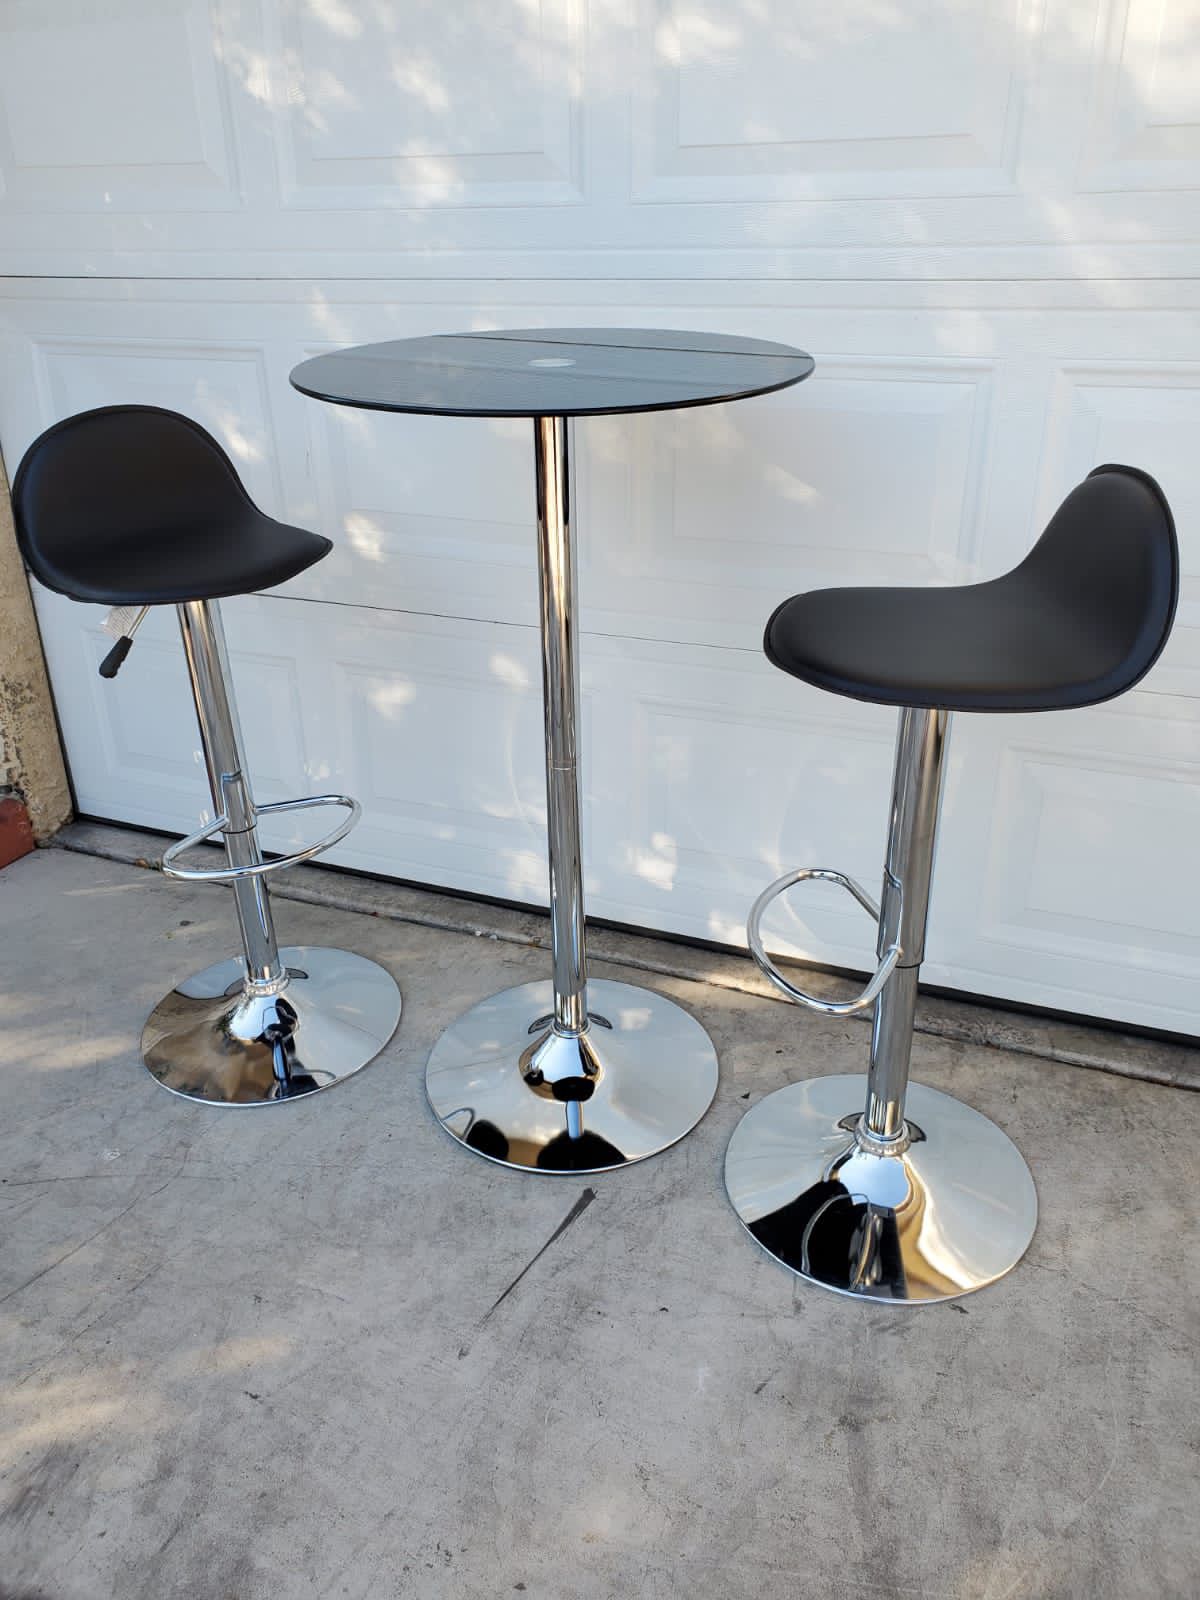 Round Pub Table With 2 Bar Stools